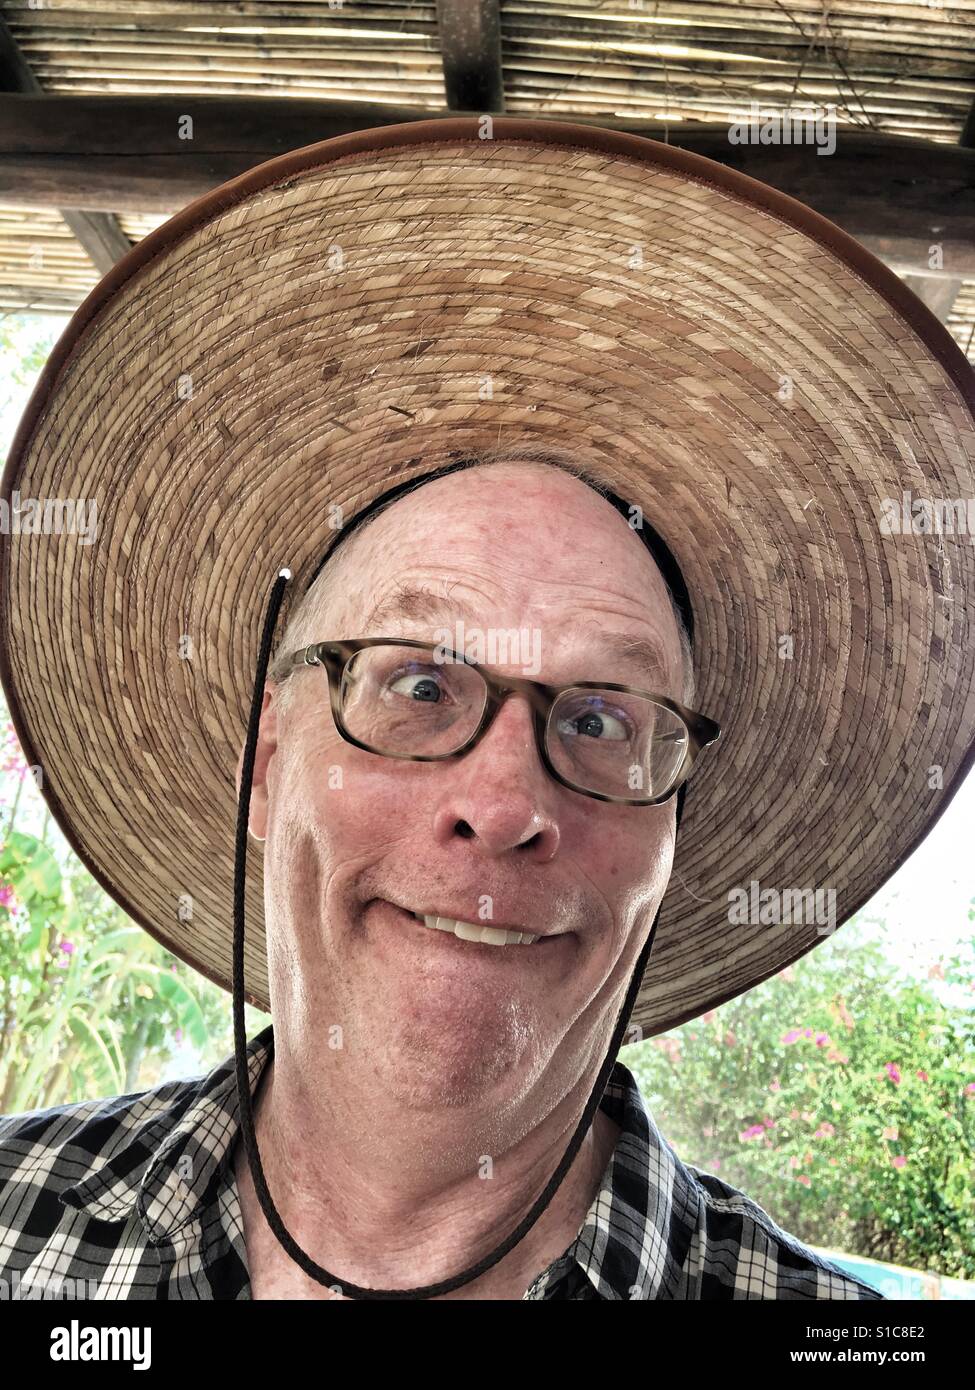 Man making funny face with giant hat Stock Photo